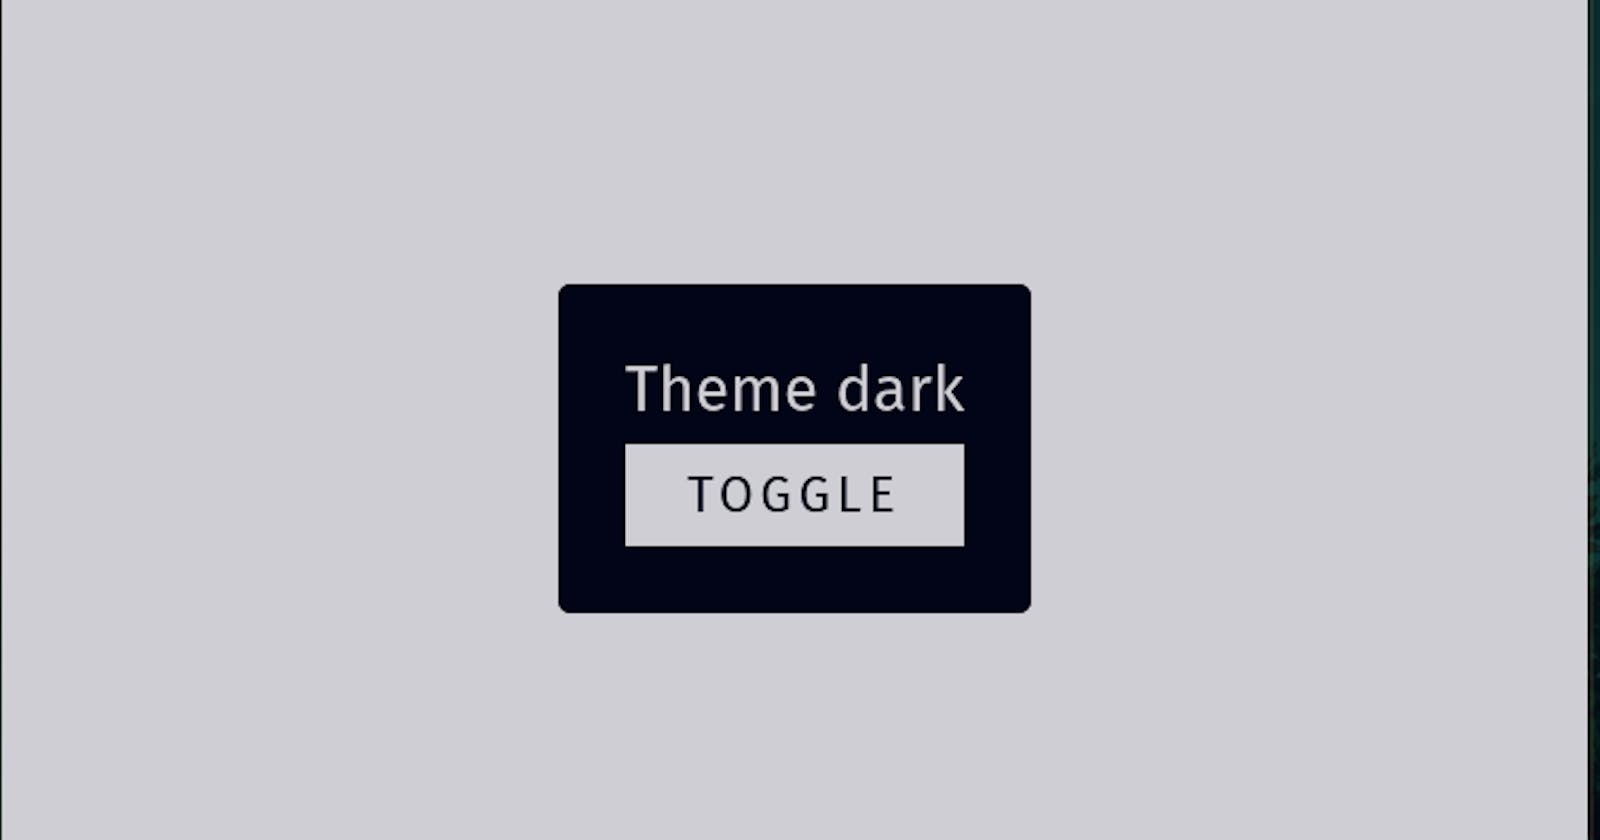 Implementing Dark Theme in a React App with Vite, TypeScript, and Tailwind CSS